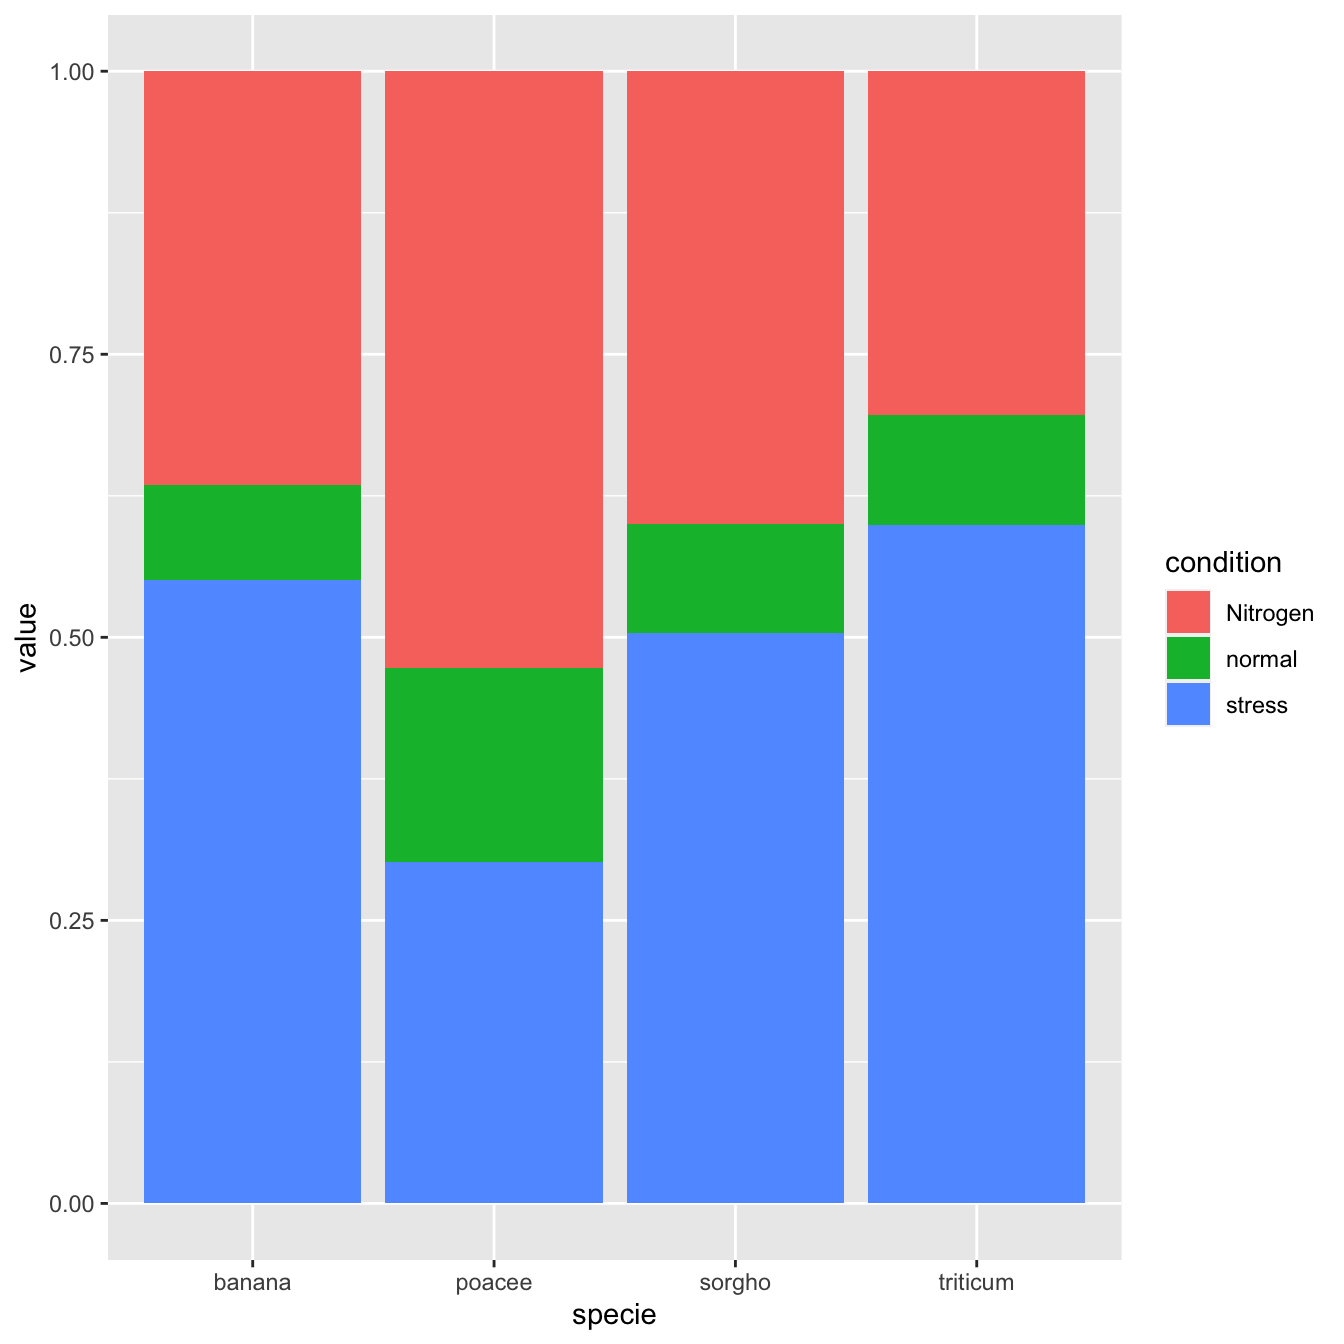 Proportional Stacked Bar Chart Ggplot The Best Porn Website